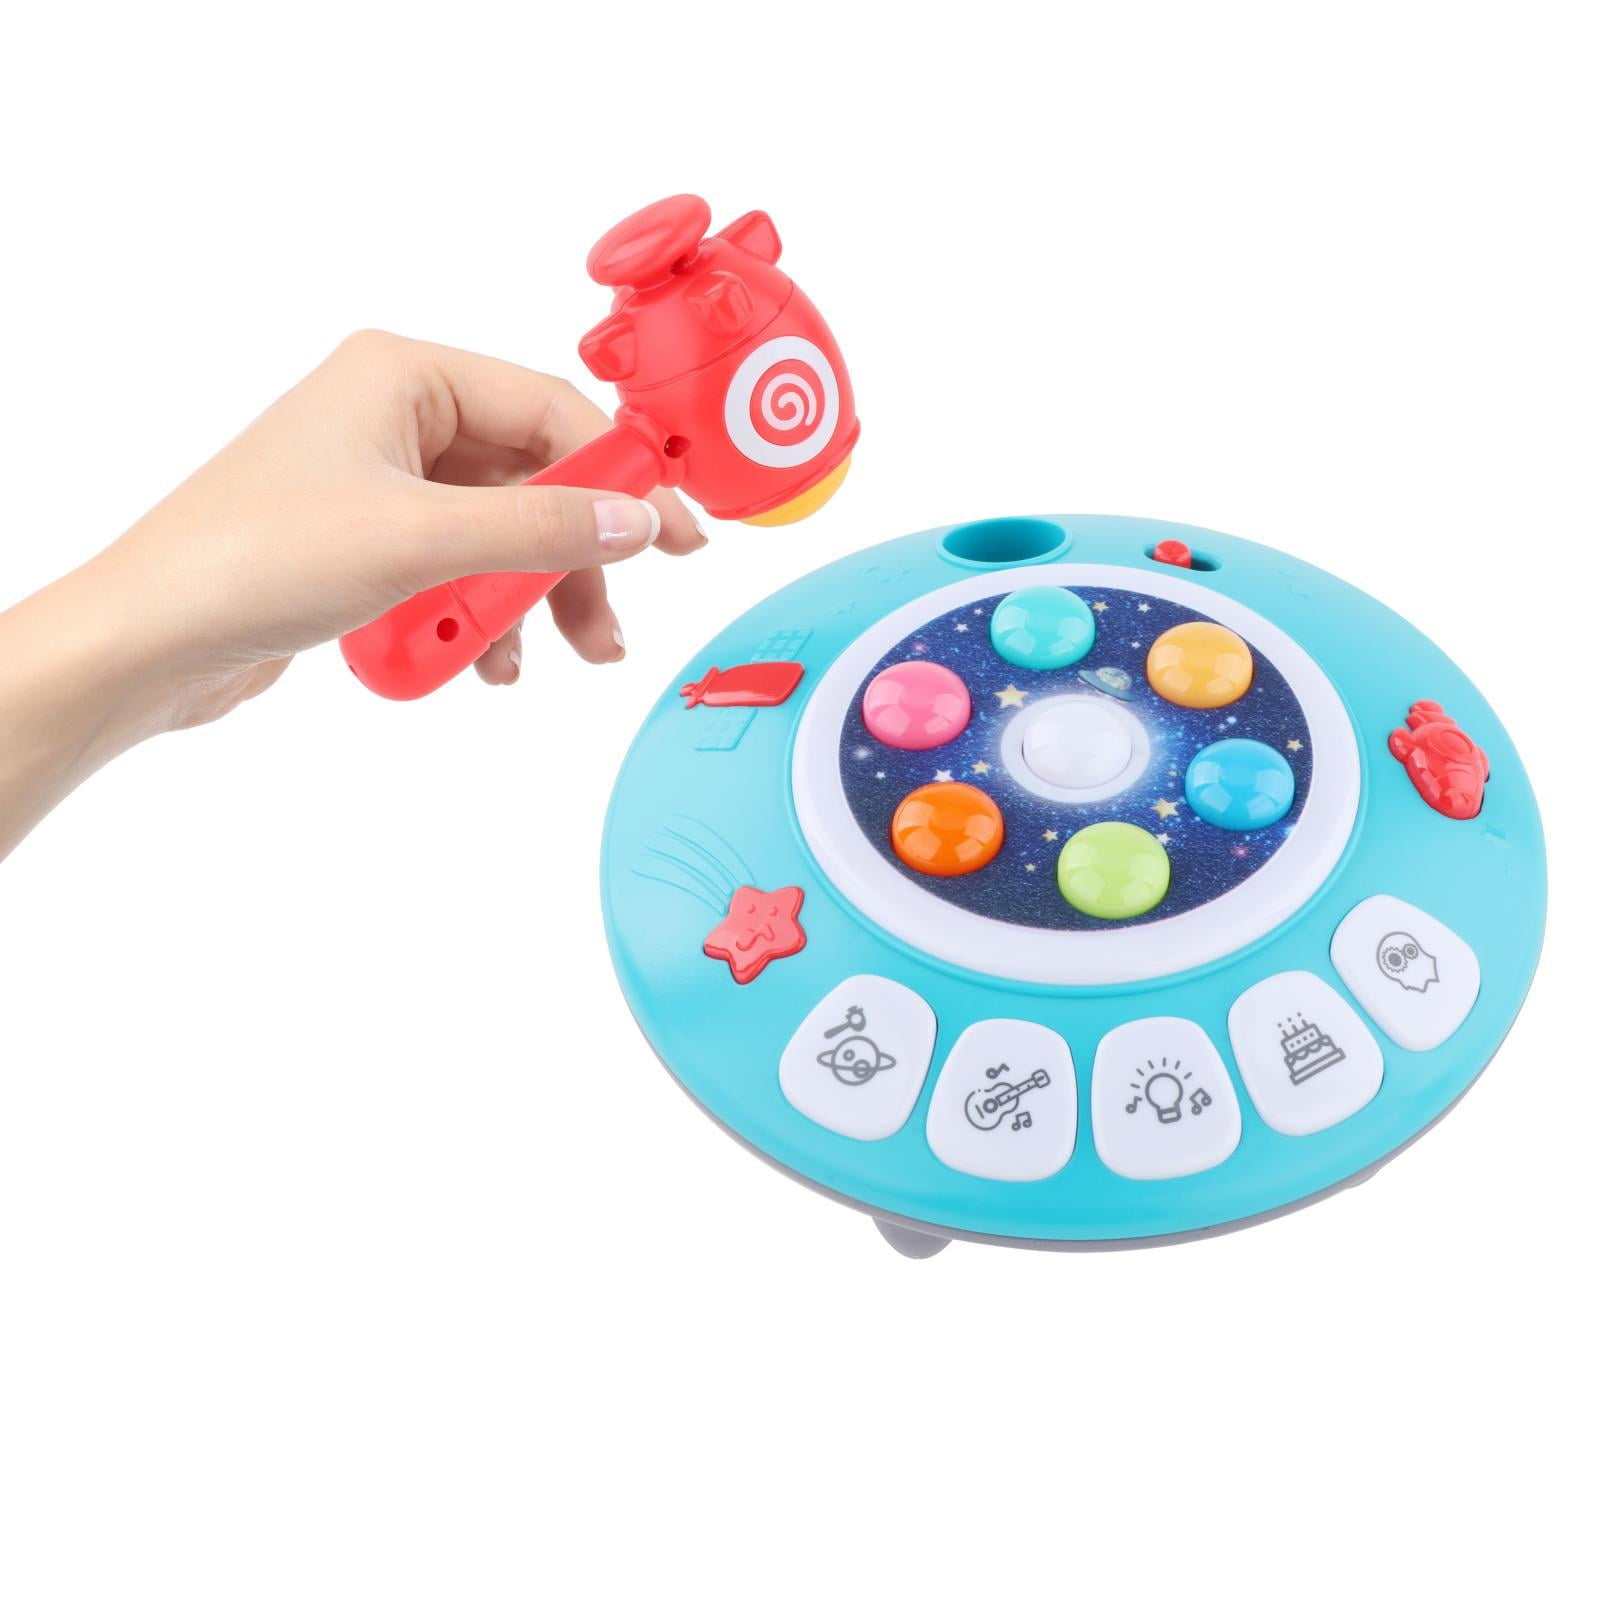 Details about   Early Education Cognitive Color Card Cognitive Shape Toy New Kids Brain Game AA 